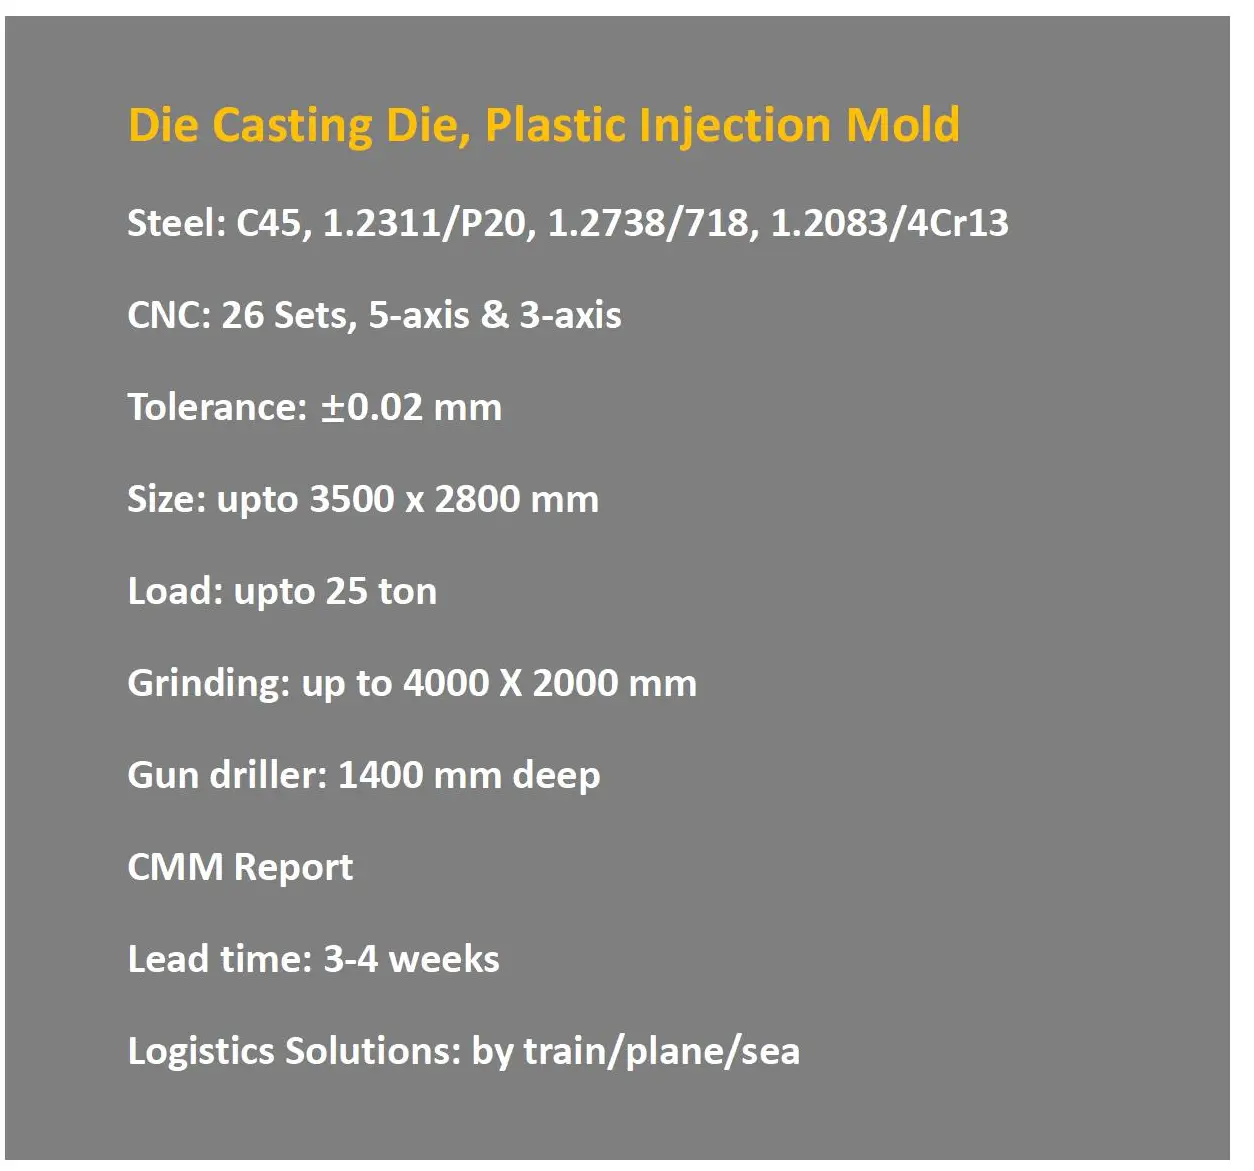 plastic injection molding,injection molding companies,plastic injection molding service,die casting,aluminium die casting,metal die casting ,custom die casting ,die casting mold,die casting company,die casting manufacturers